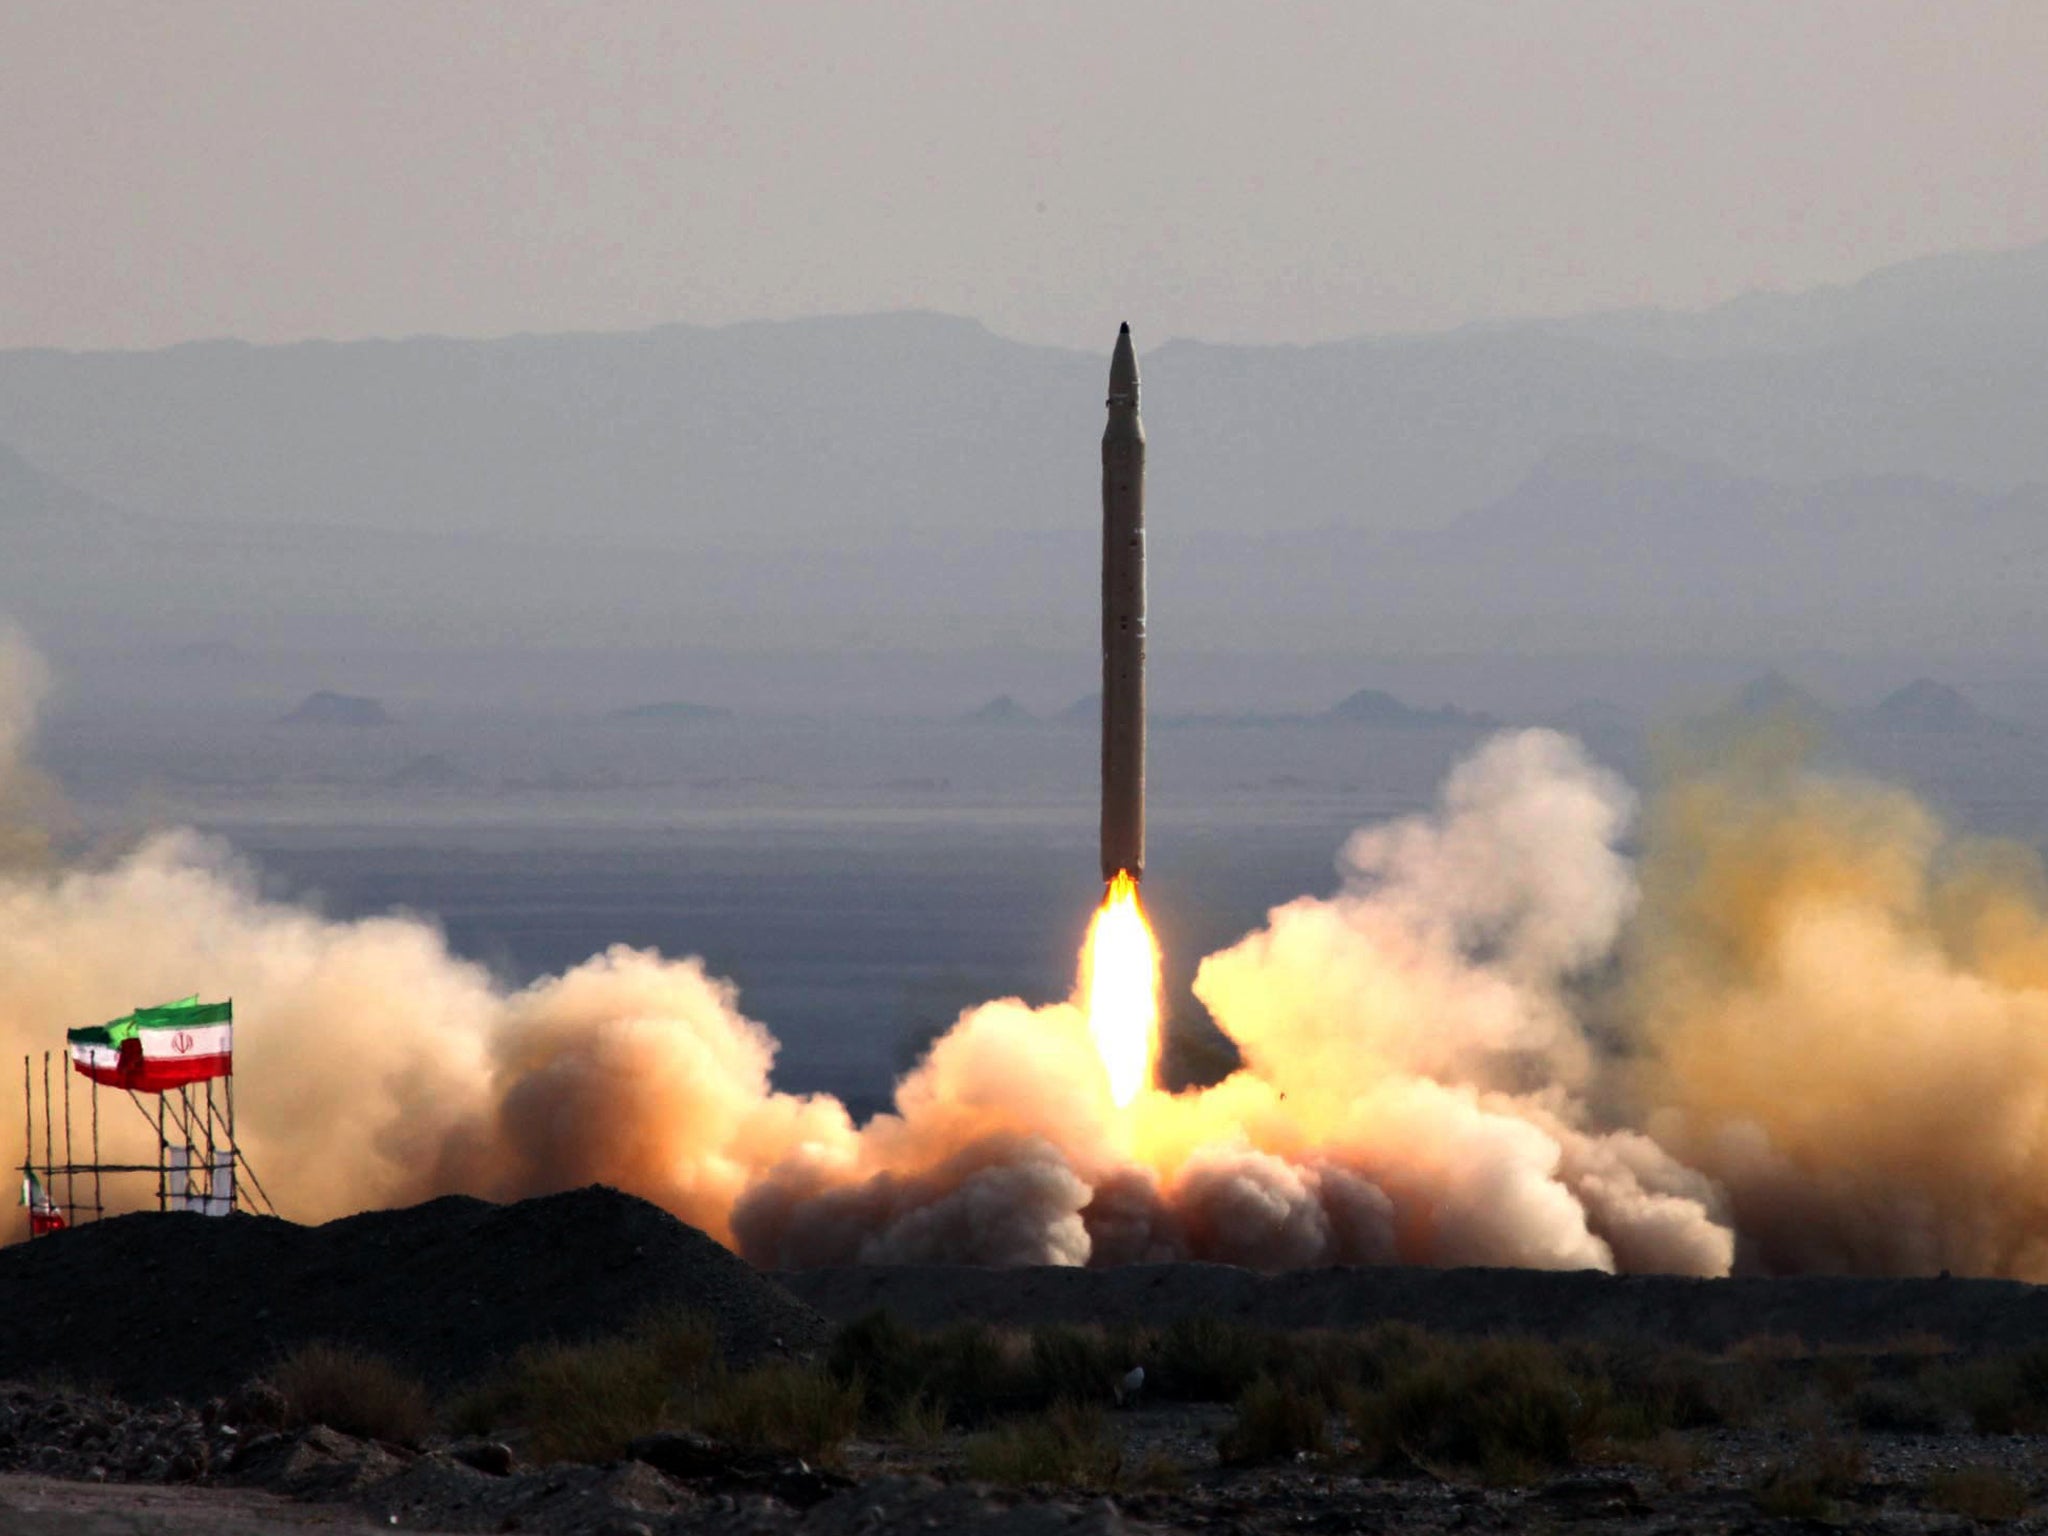 The test firing at an undisclosed location in Iran of a surface-to-surface Qiam missile